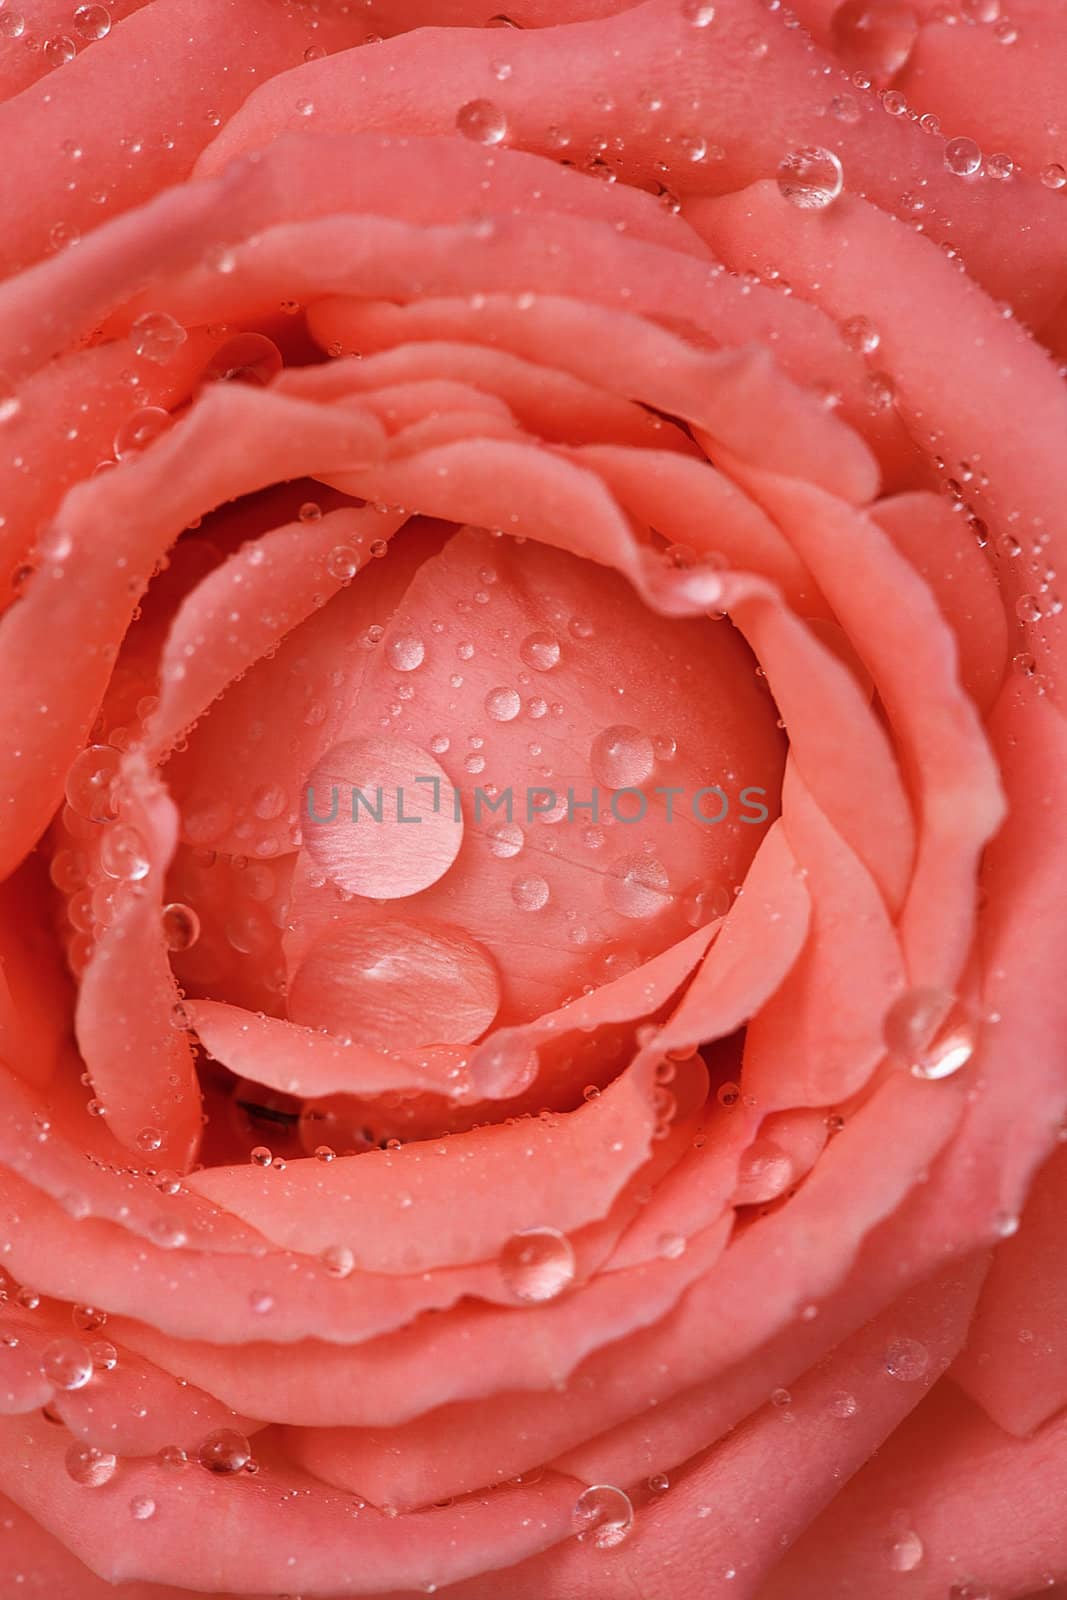 Rosa covered with dew drops close-up - the background